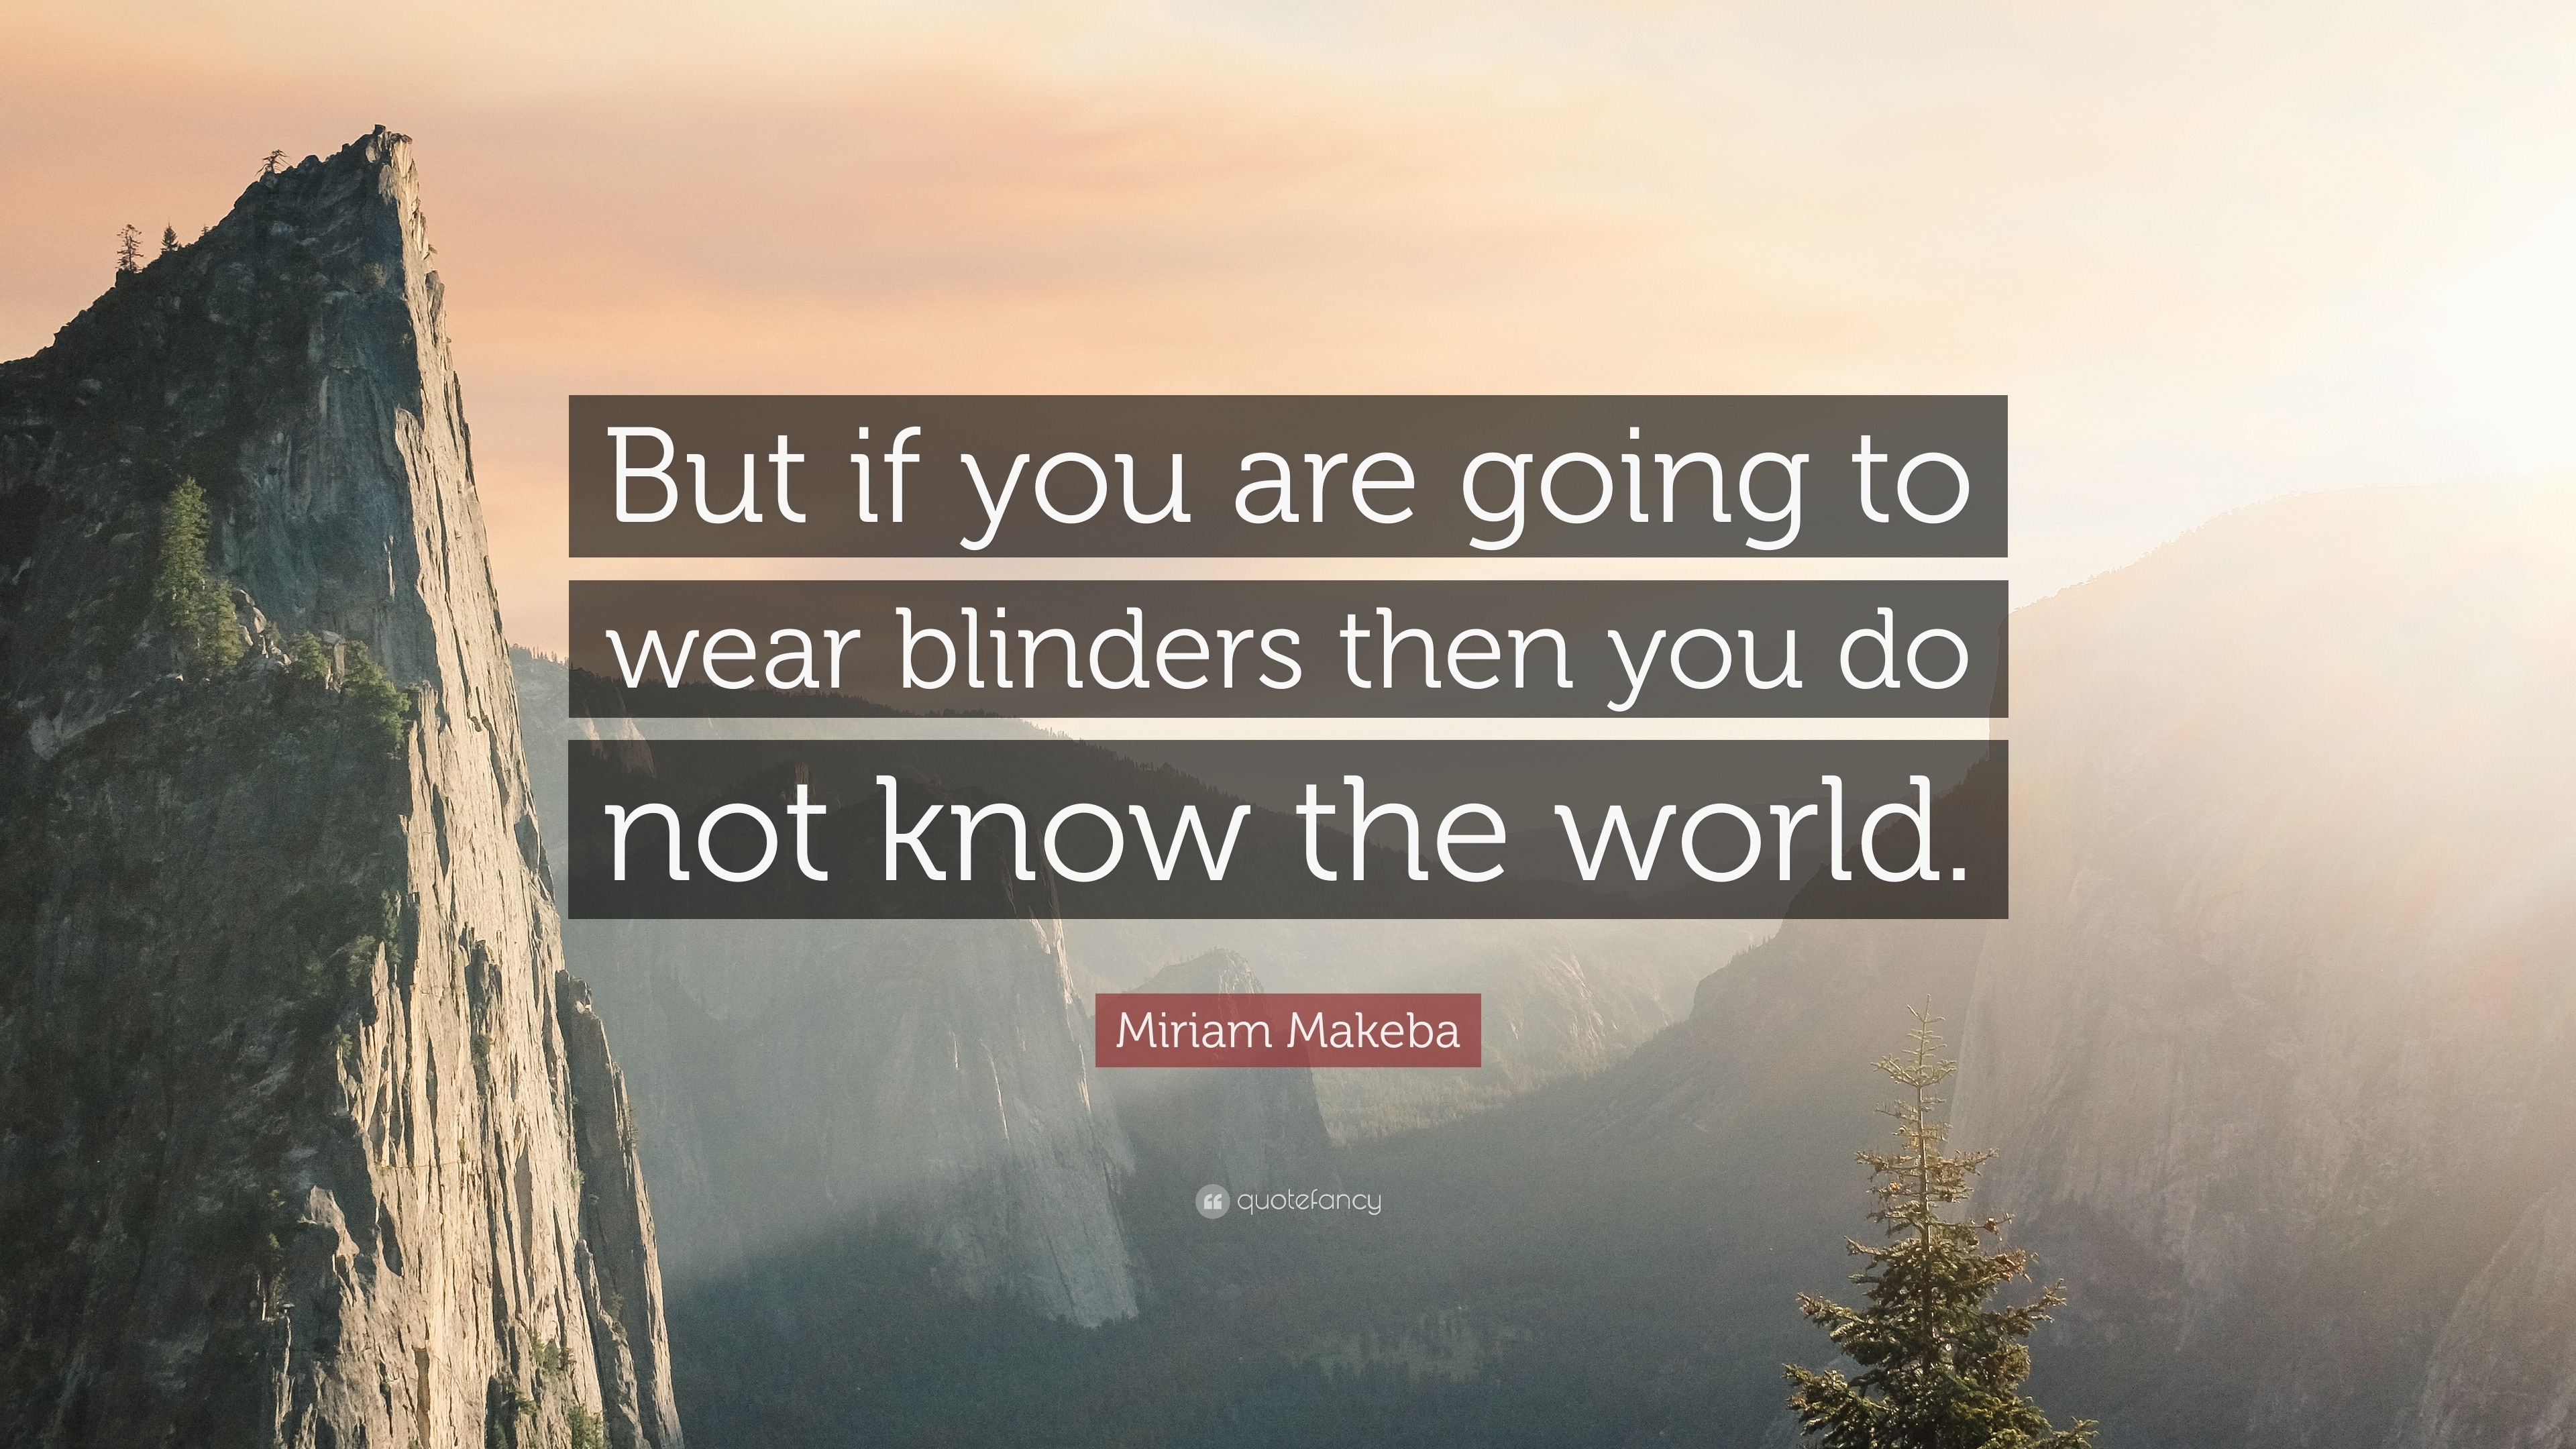 Don't Go Through Life Wearing Blinders